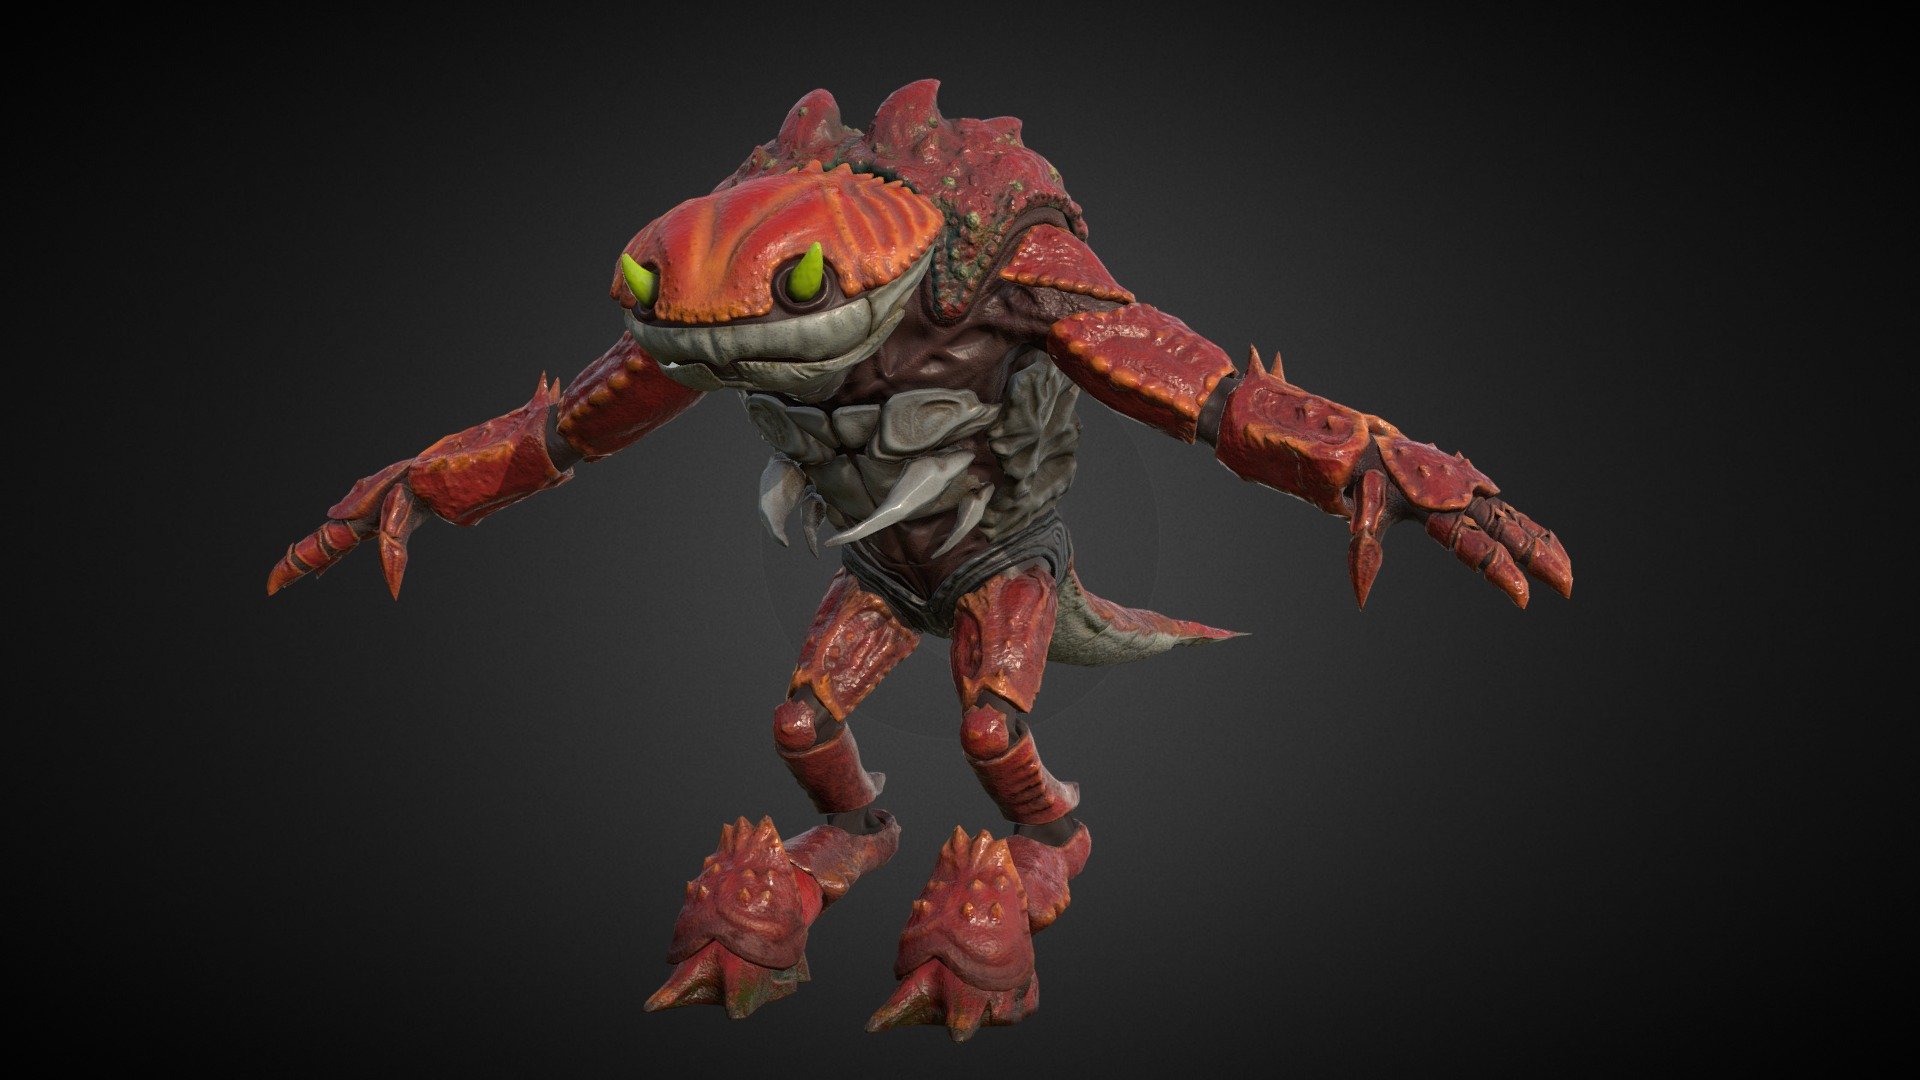 After a long time of sitting unfinished, here he is! This guy has been collecting dust in my computer files for a while. He started as a class project, but I never felt I did the original concept art justice after the one week I had to work on him, so I decided to resculpt and finally get around to texturing him. I had to fix a lot of stuff as well as optimize him for him to be game ready! I’m very happy with how this guy turned out, and it was a good piece to practice all aspects of the pipeline since I did a lot of back and forth changes. I decided to go a bit more realistic and dirty than in the concept by adding grime, barnacles, mold, etc.
Sculpted in ZBrush, Modeled/Retopo/UVs in Maya, textured and rendered in Substance Painter with Iray

Link to the original concept piece - https://www.deviantart.com/armandeo64/art/Crab-639872936 - Crab Monster - 3D model by Dusty Langeberg (@dlangeberg) 3d model